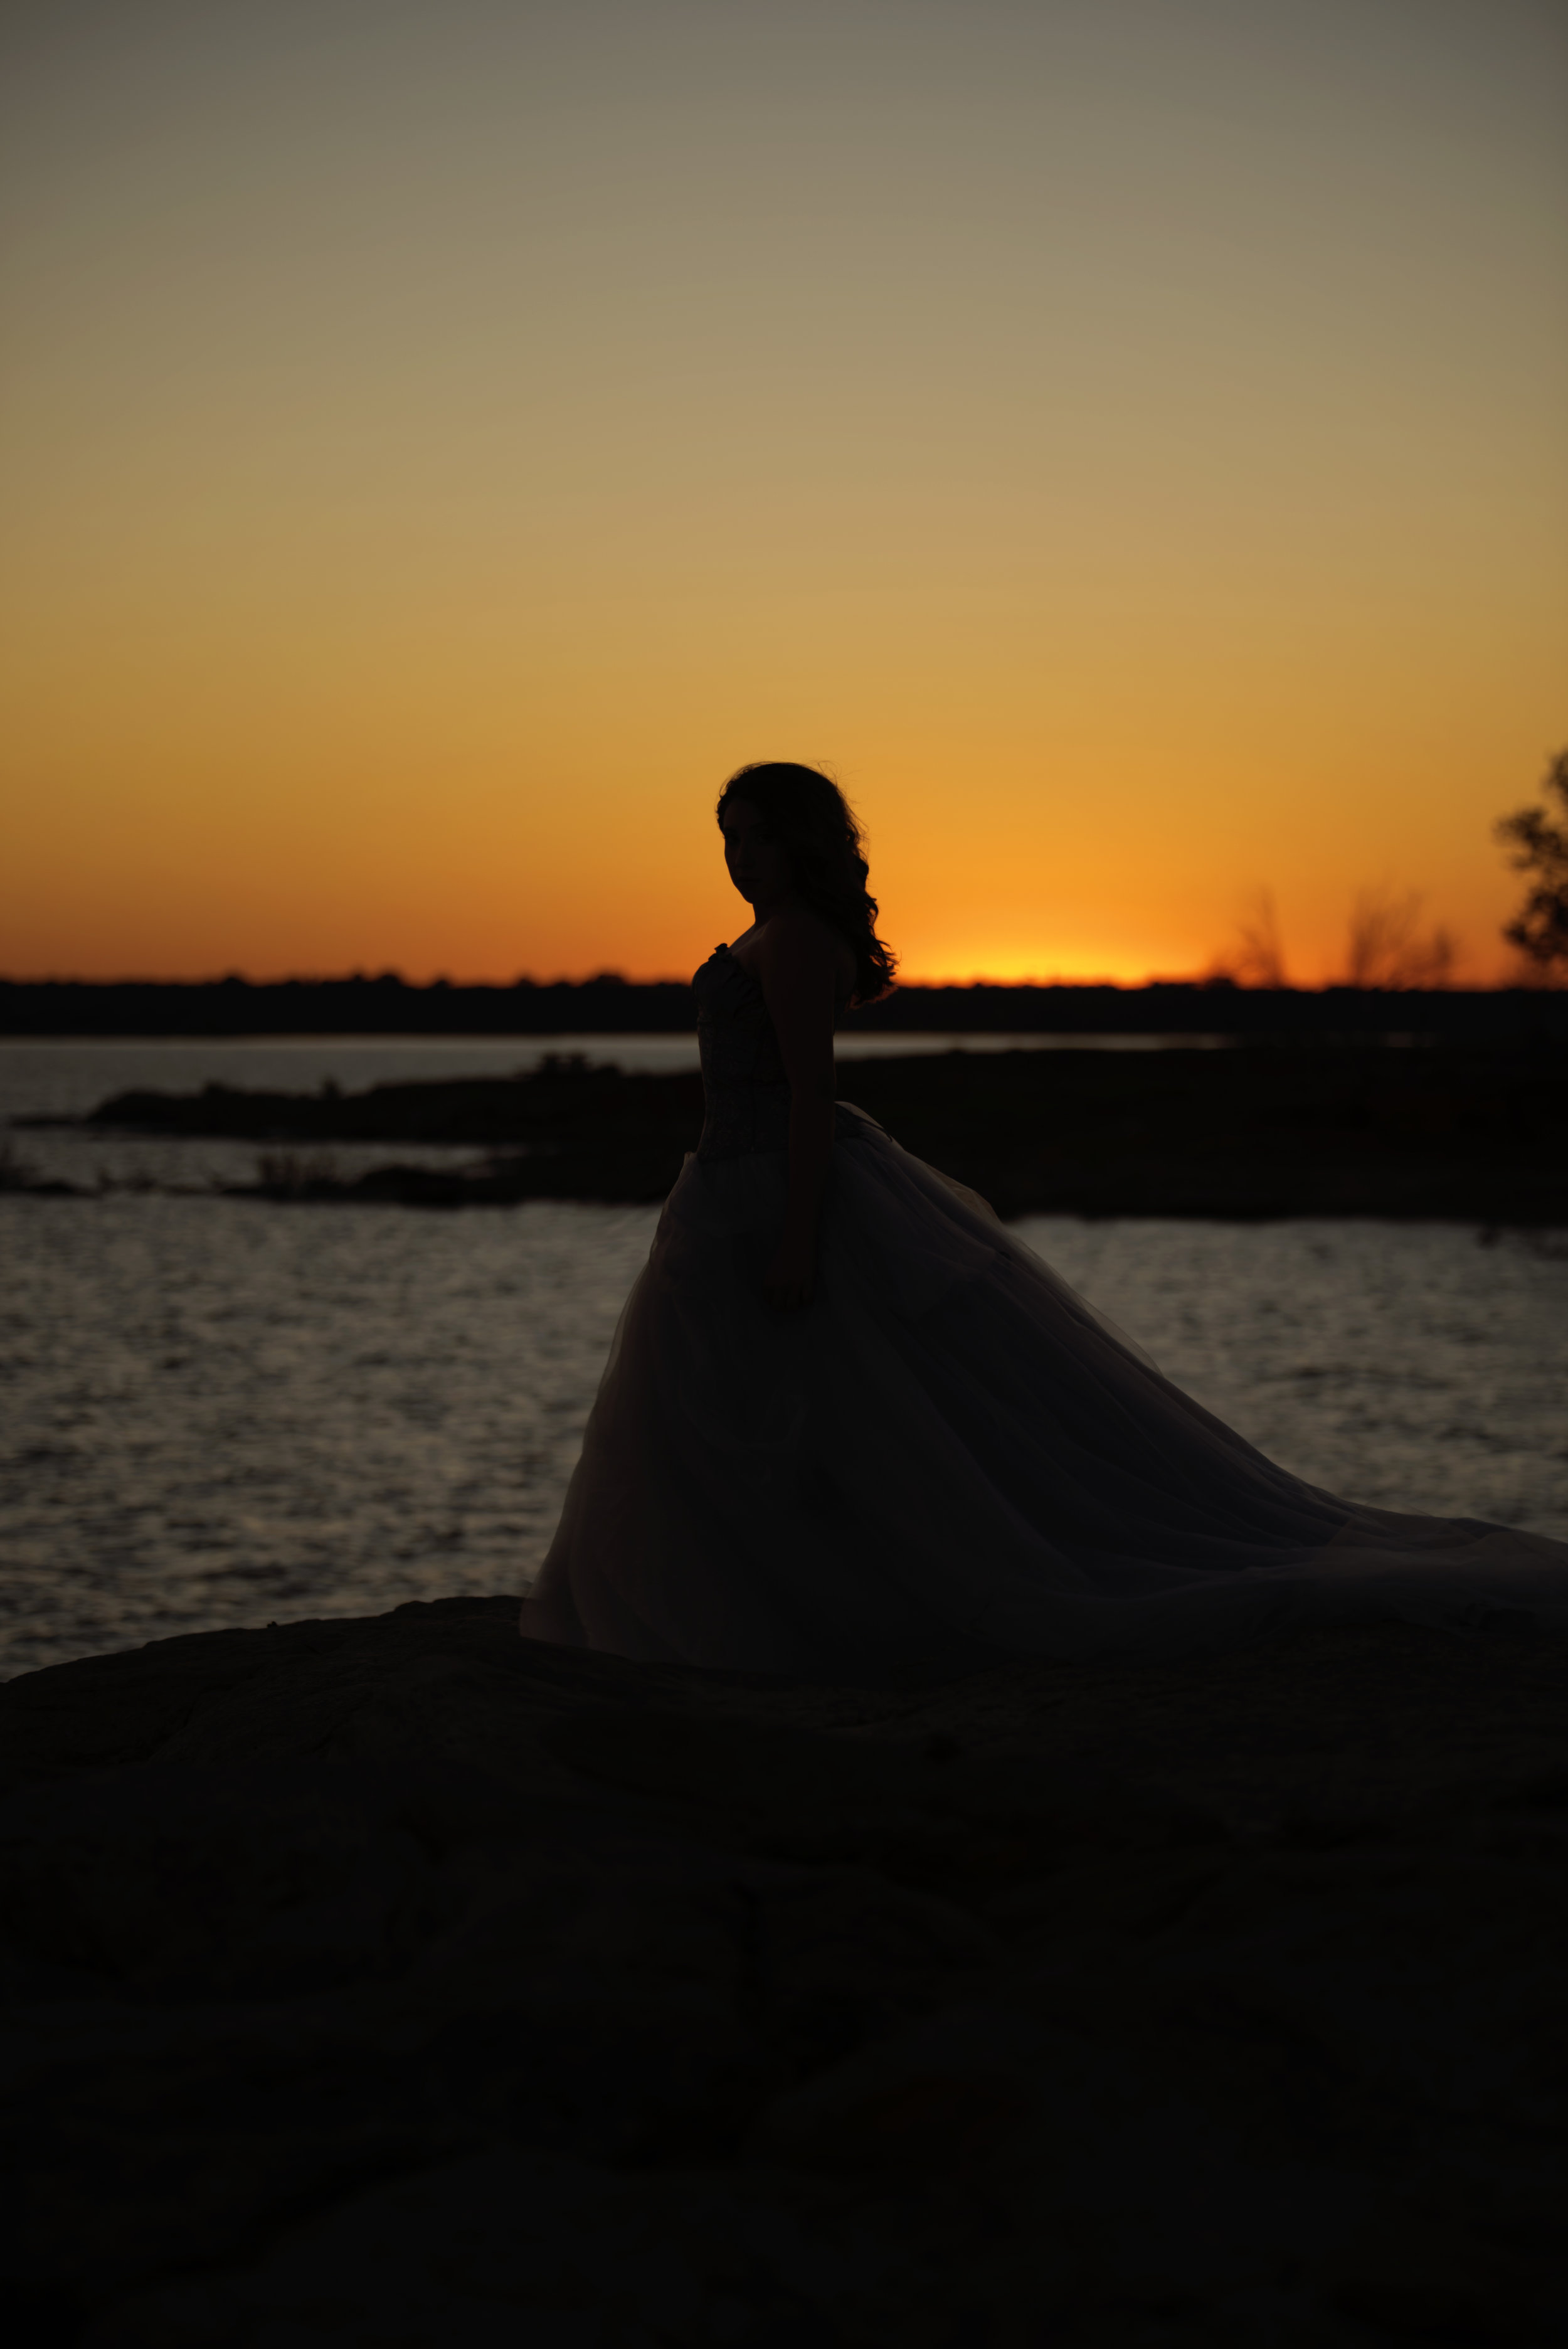  Silhouette of a woman in a dress at dusk, with the sun in the background. Castle Rock  